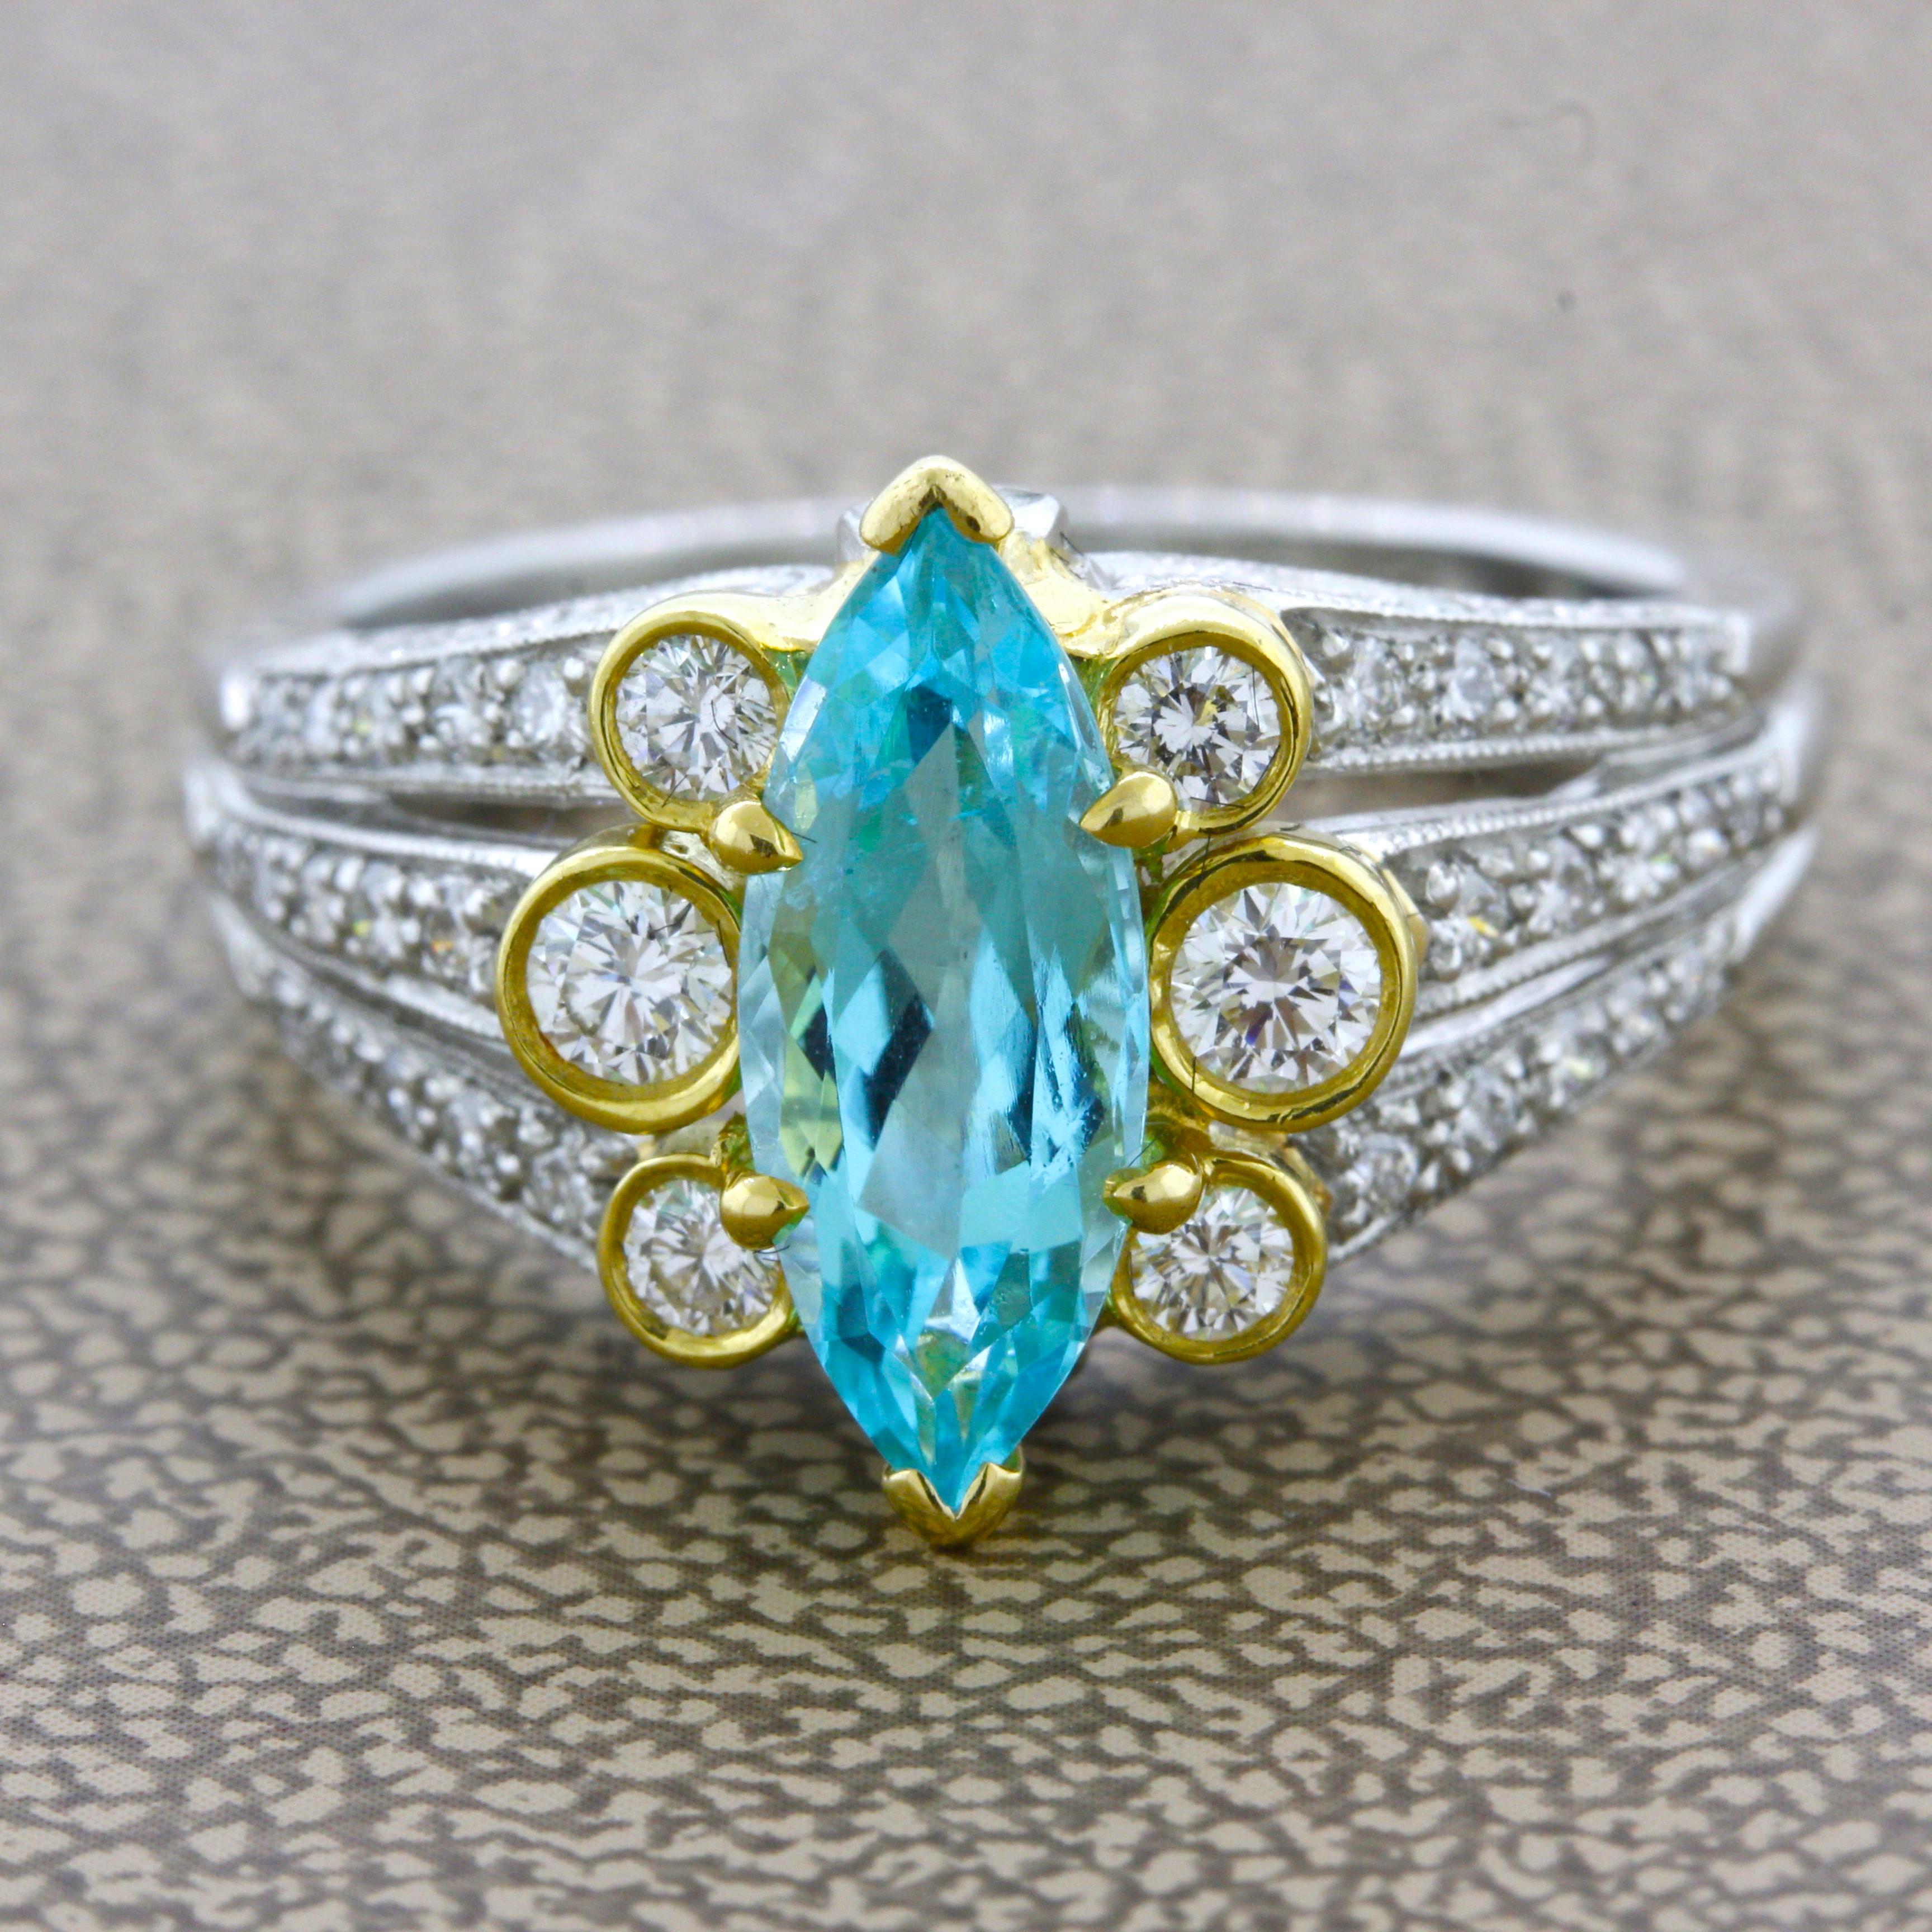 A rare and prized Paraiba tourmaline from Brazil takes center stage of this two-tone platinum gold ring. The reason for the rarity and desirability of Brazilian Paraiba is its unique neon electric color. This particular stone is no different as the